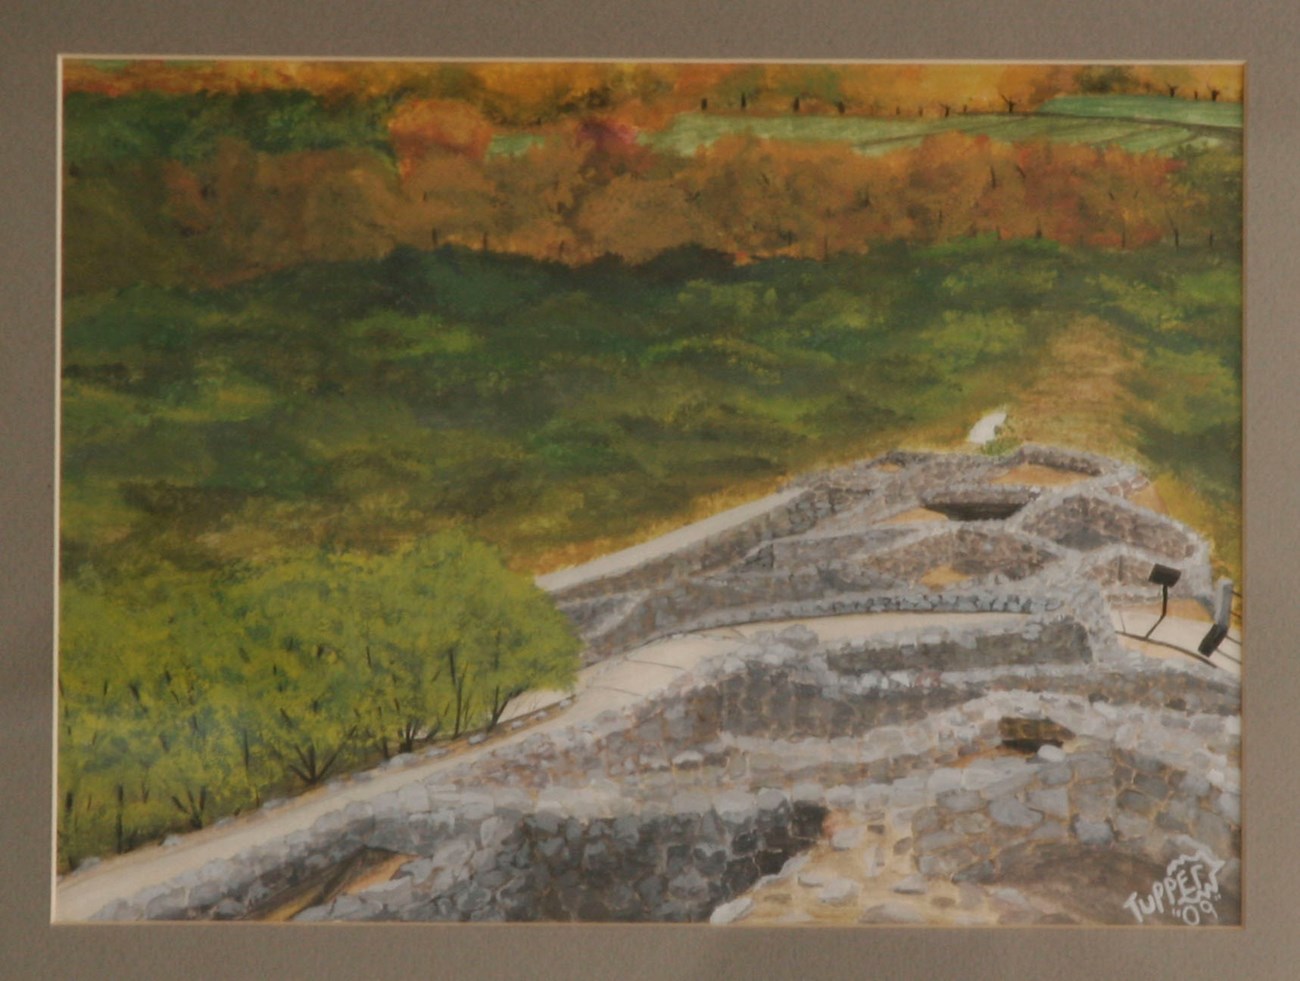 Tuzigoot painted by Tupper